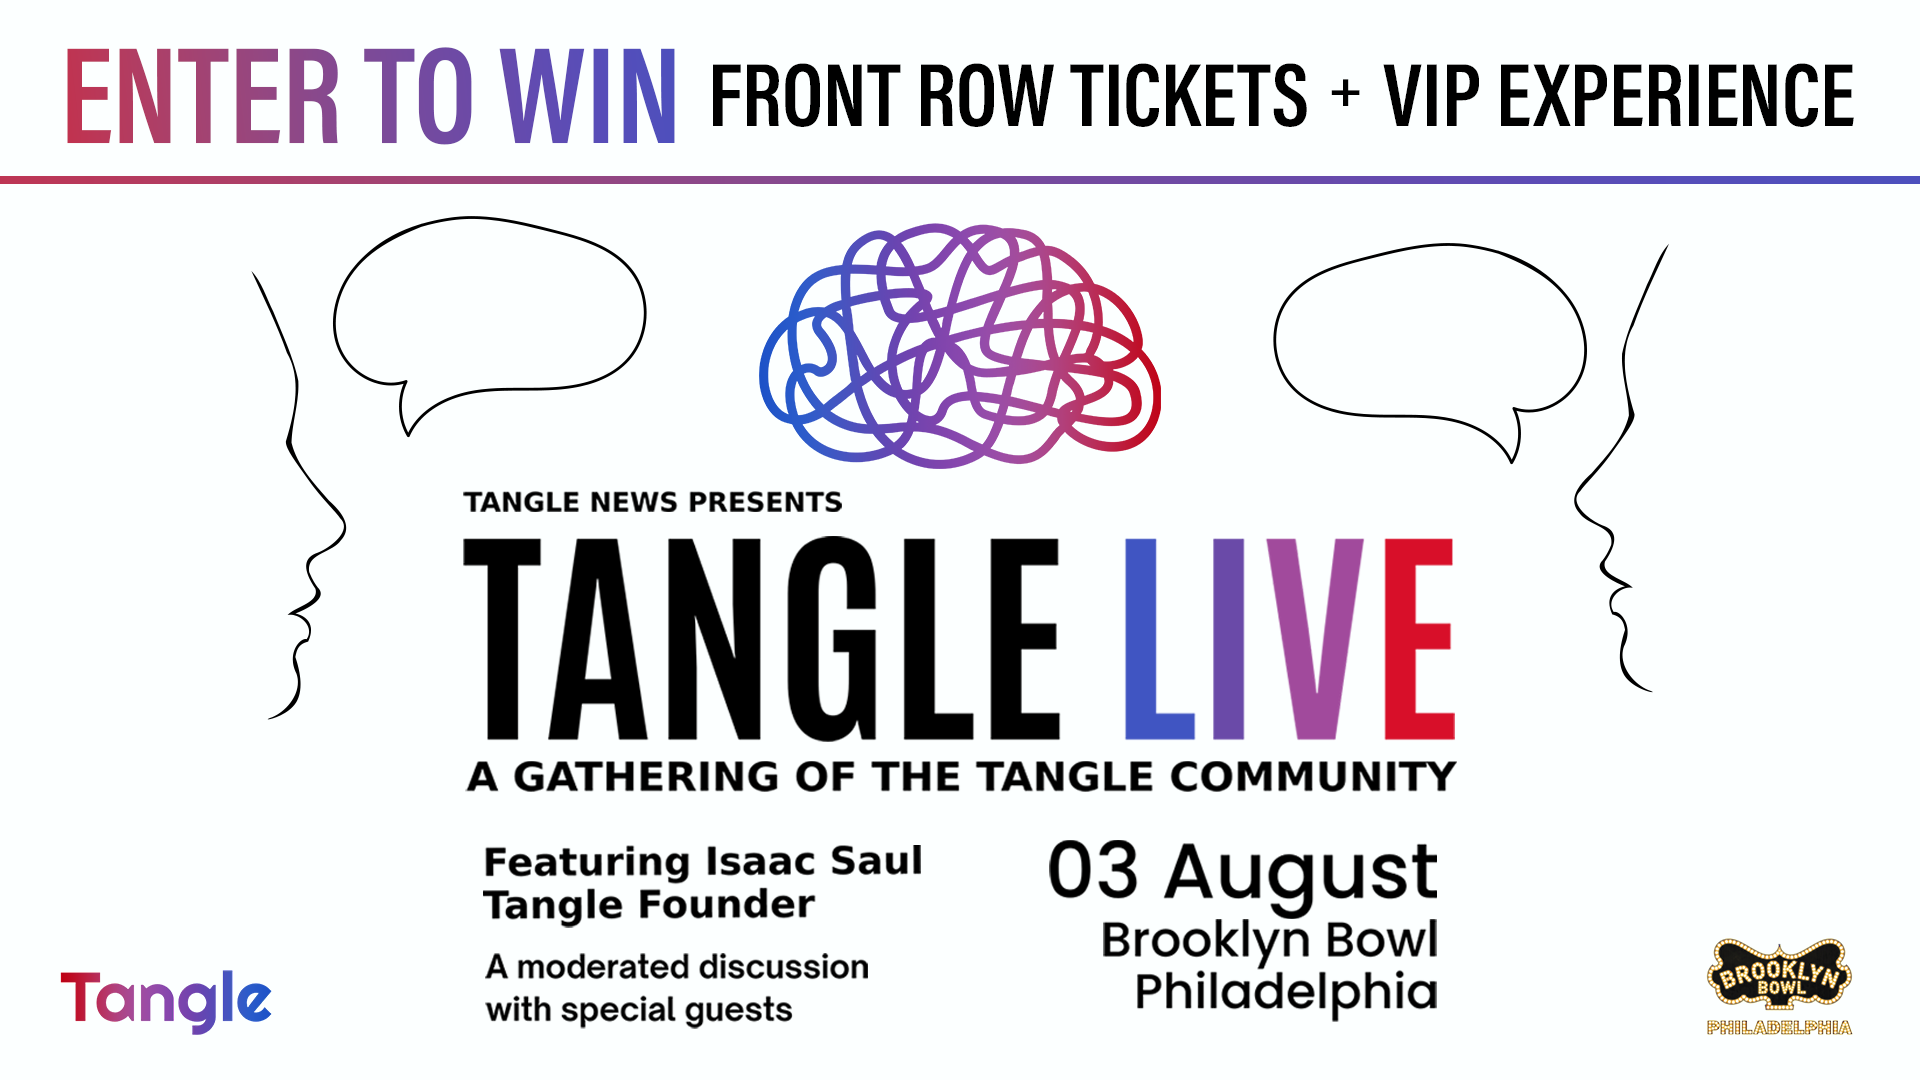 More Info for CONTEST! WIN TWO (2) TICKETS + VIP EXPERIENCE TO TANGLE LIVE AT BROOKLYN BOWL